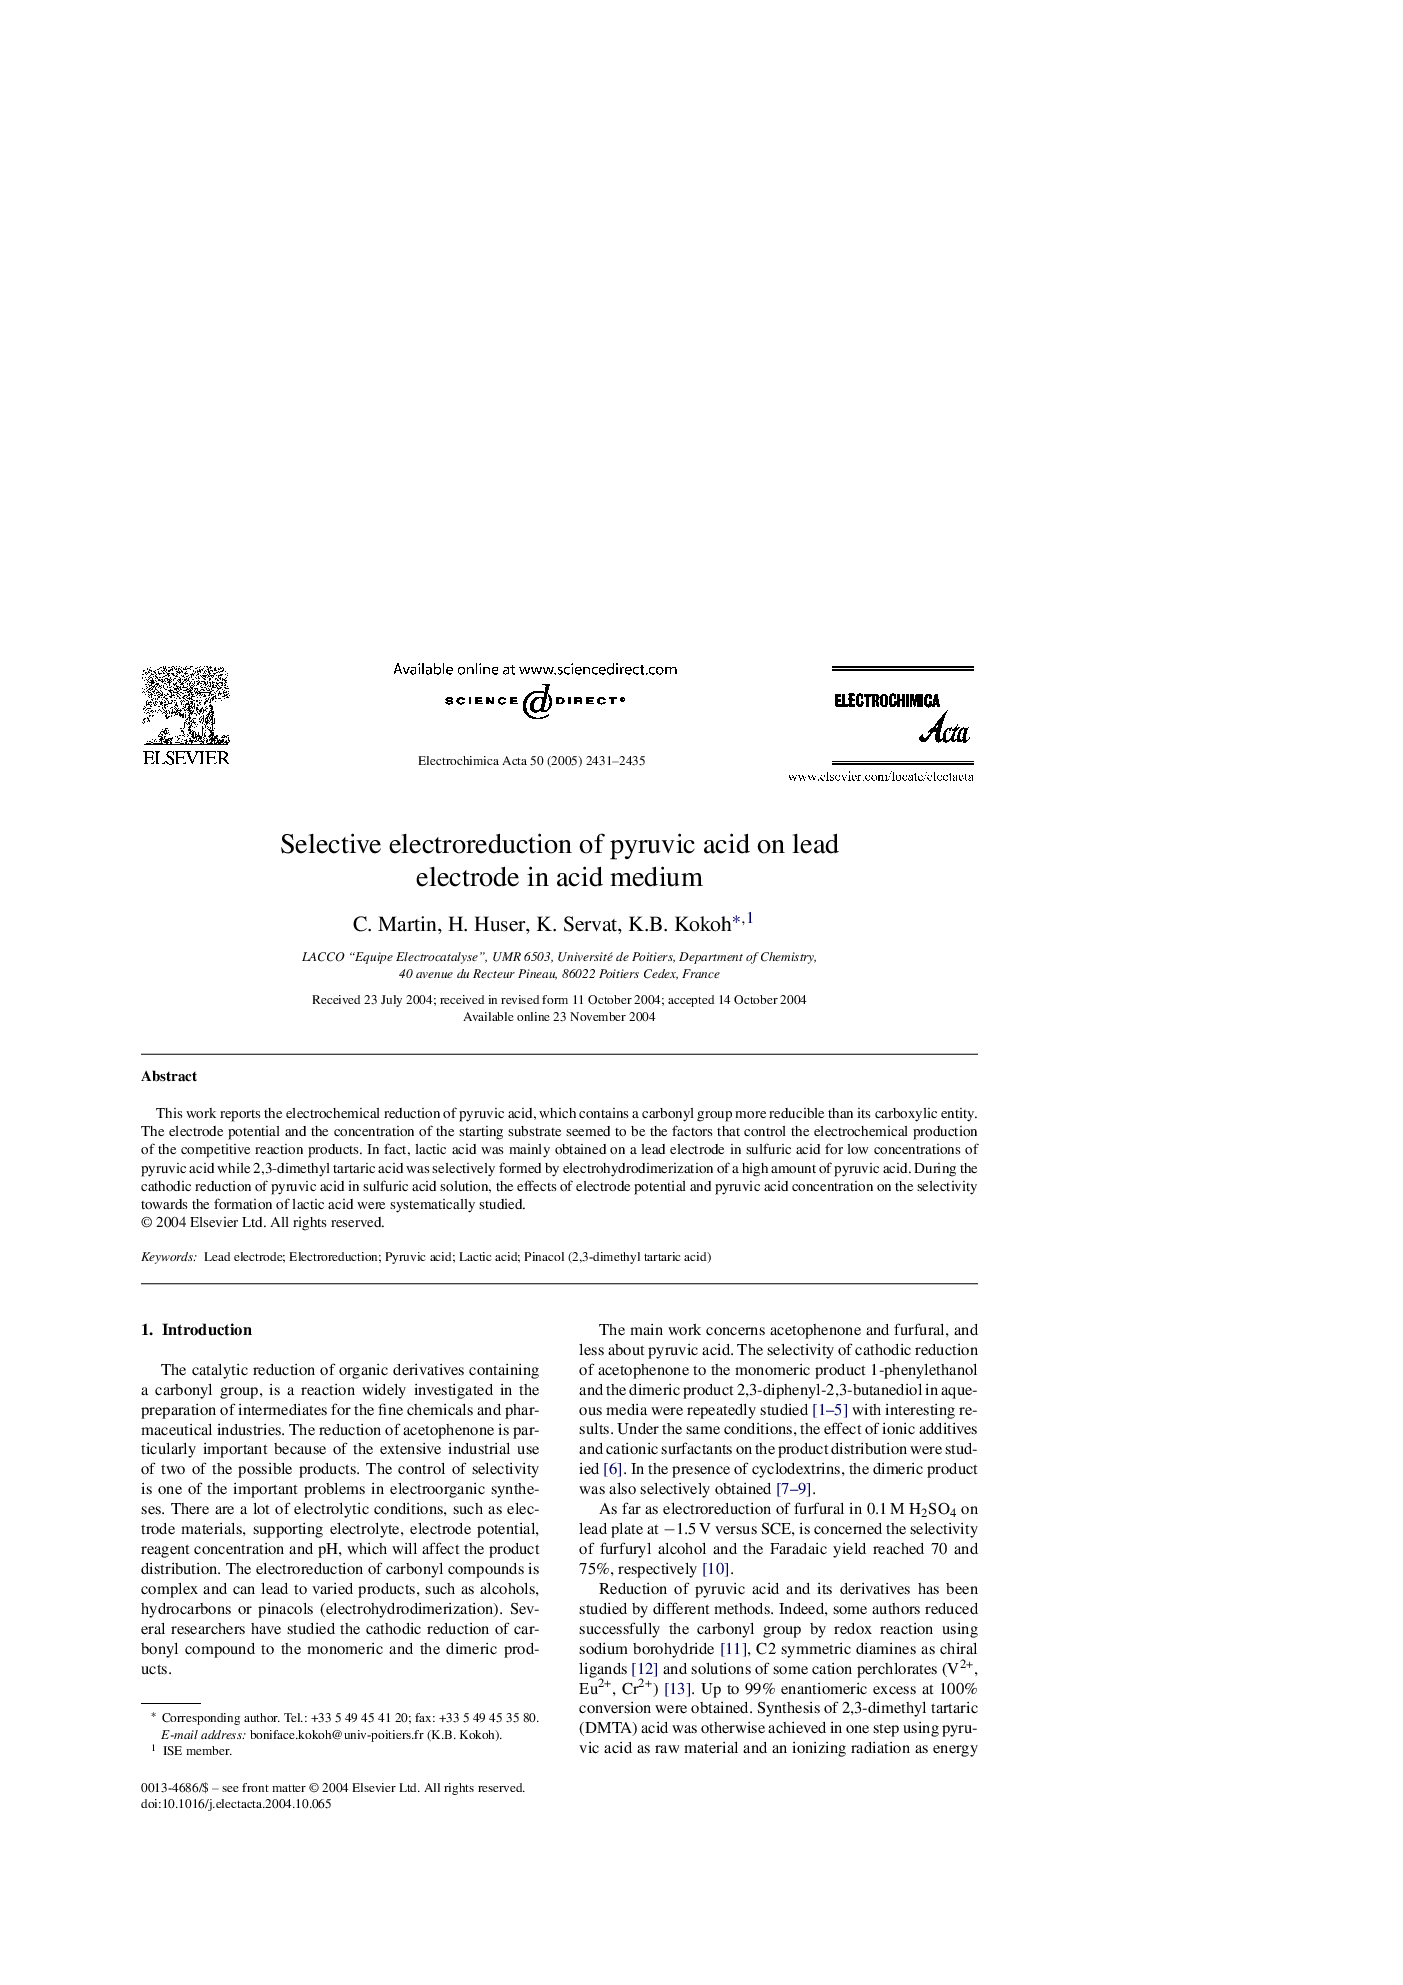 Selective electroreduction of pyruvic acid on lead electrode in acid medium